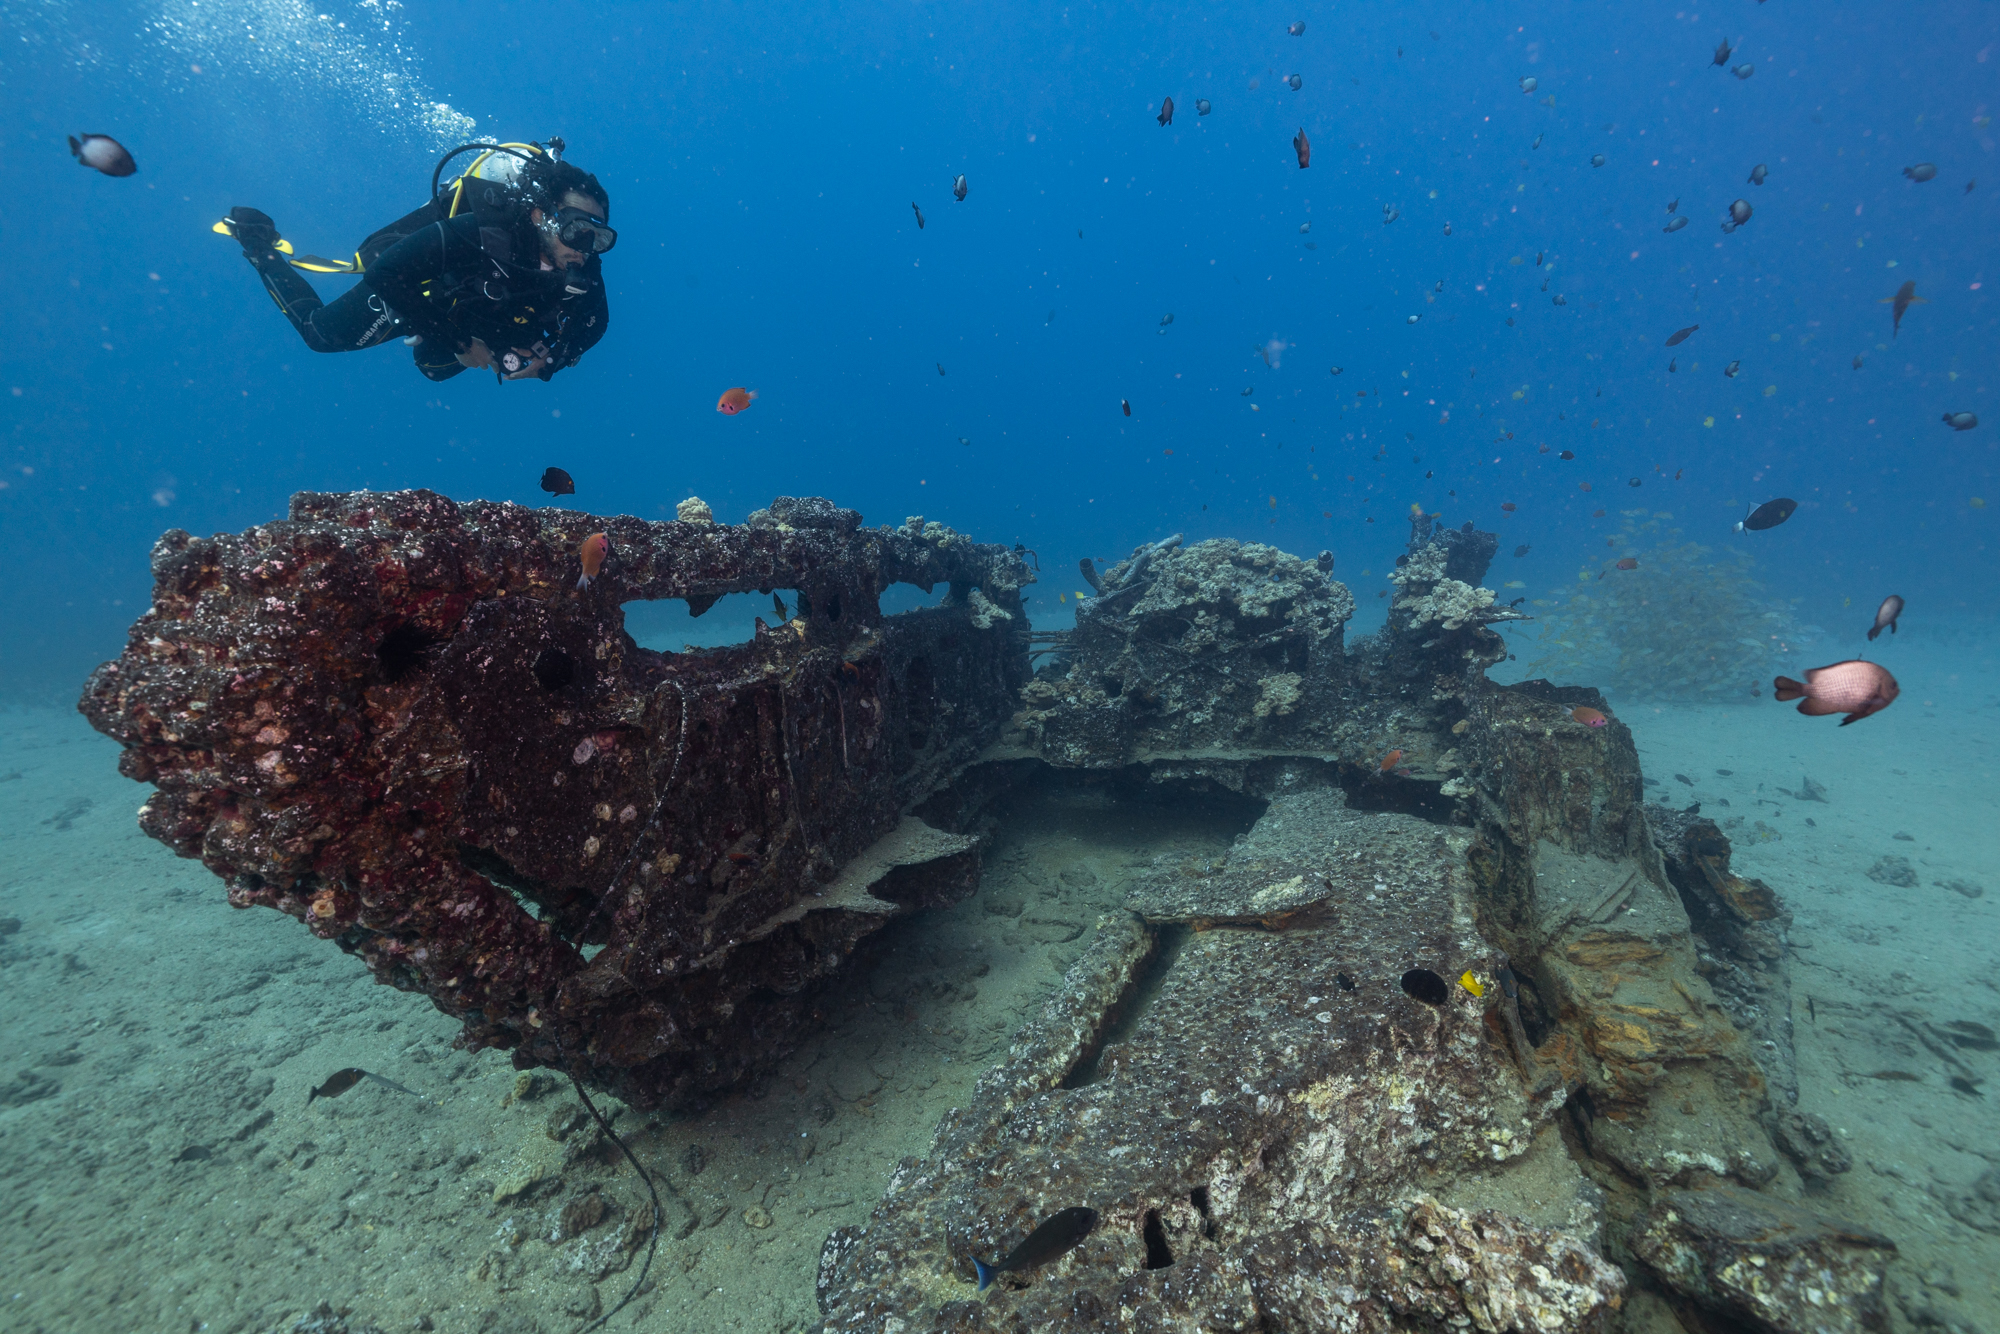 Justin Dunnavant diving underwater looking at a wreck